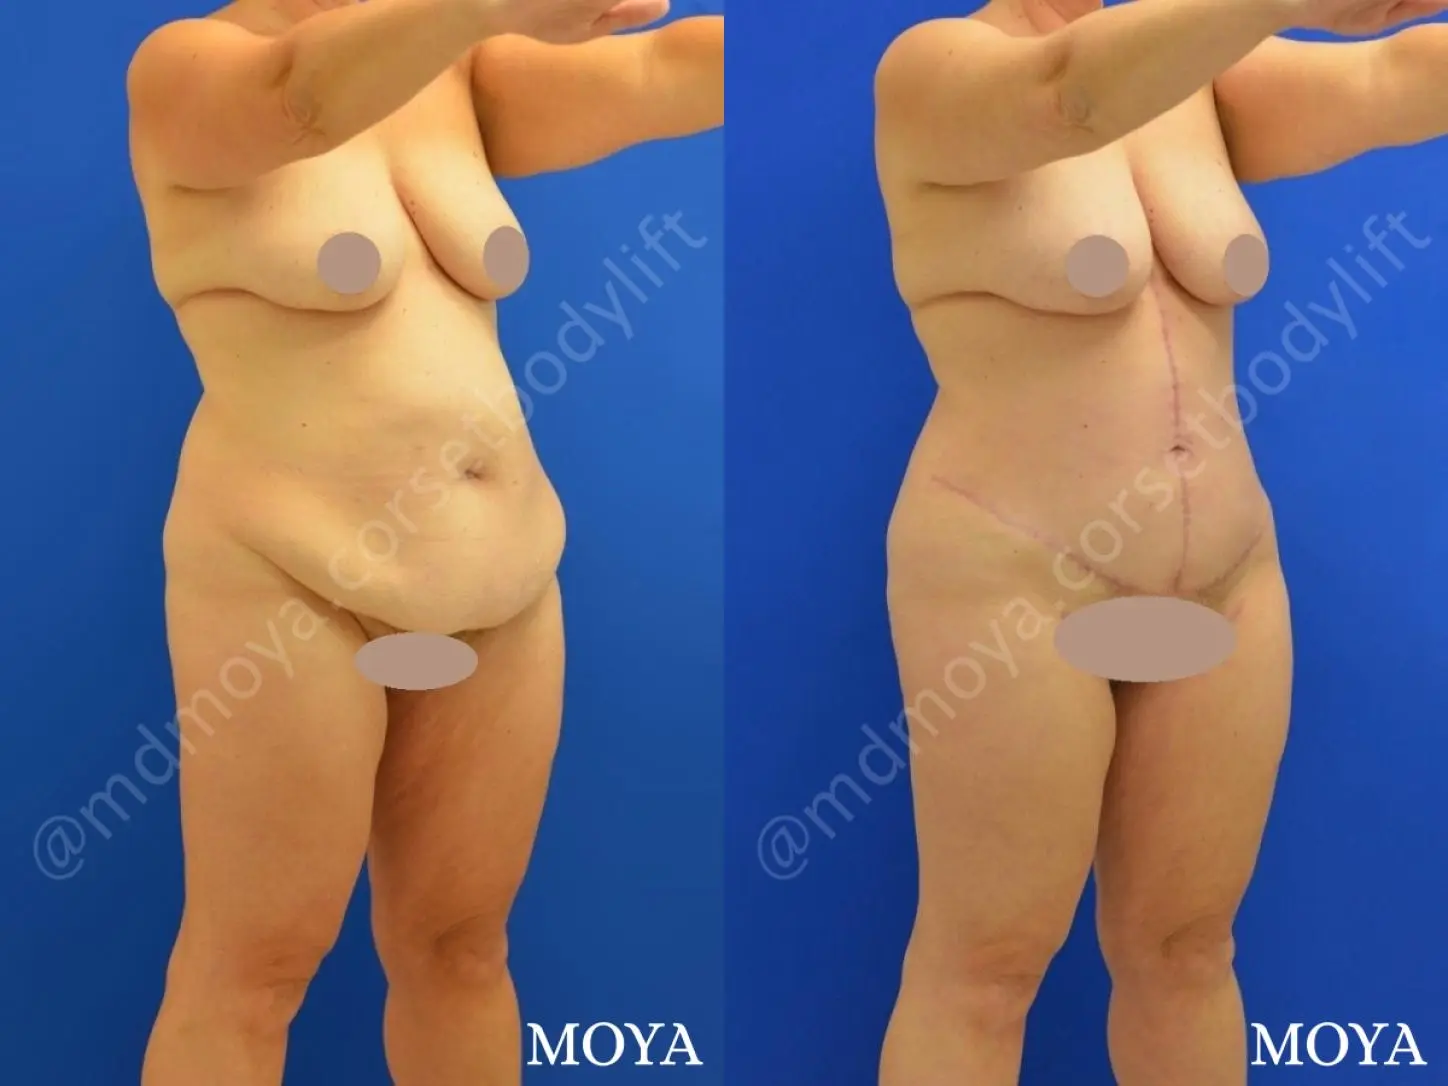 Fleur-de-lis Tummy Tuck (std):  BMI 29 - Before and After 2